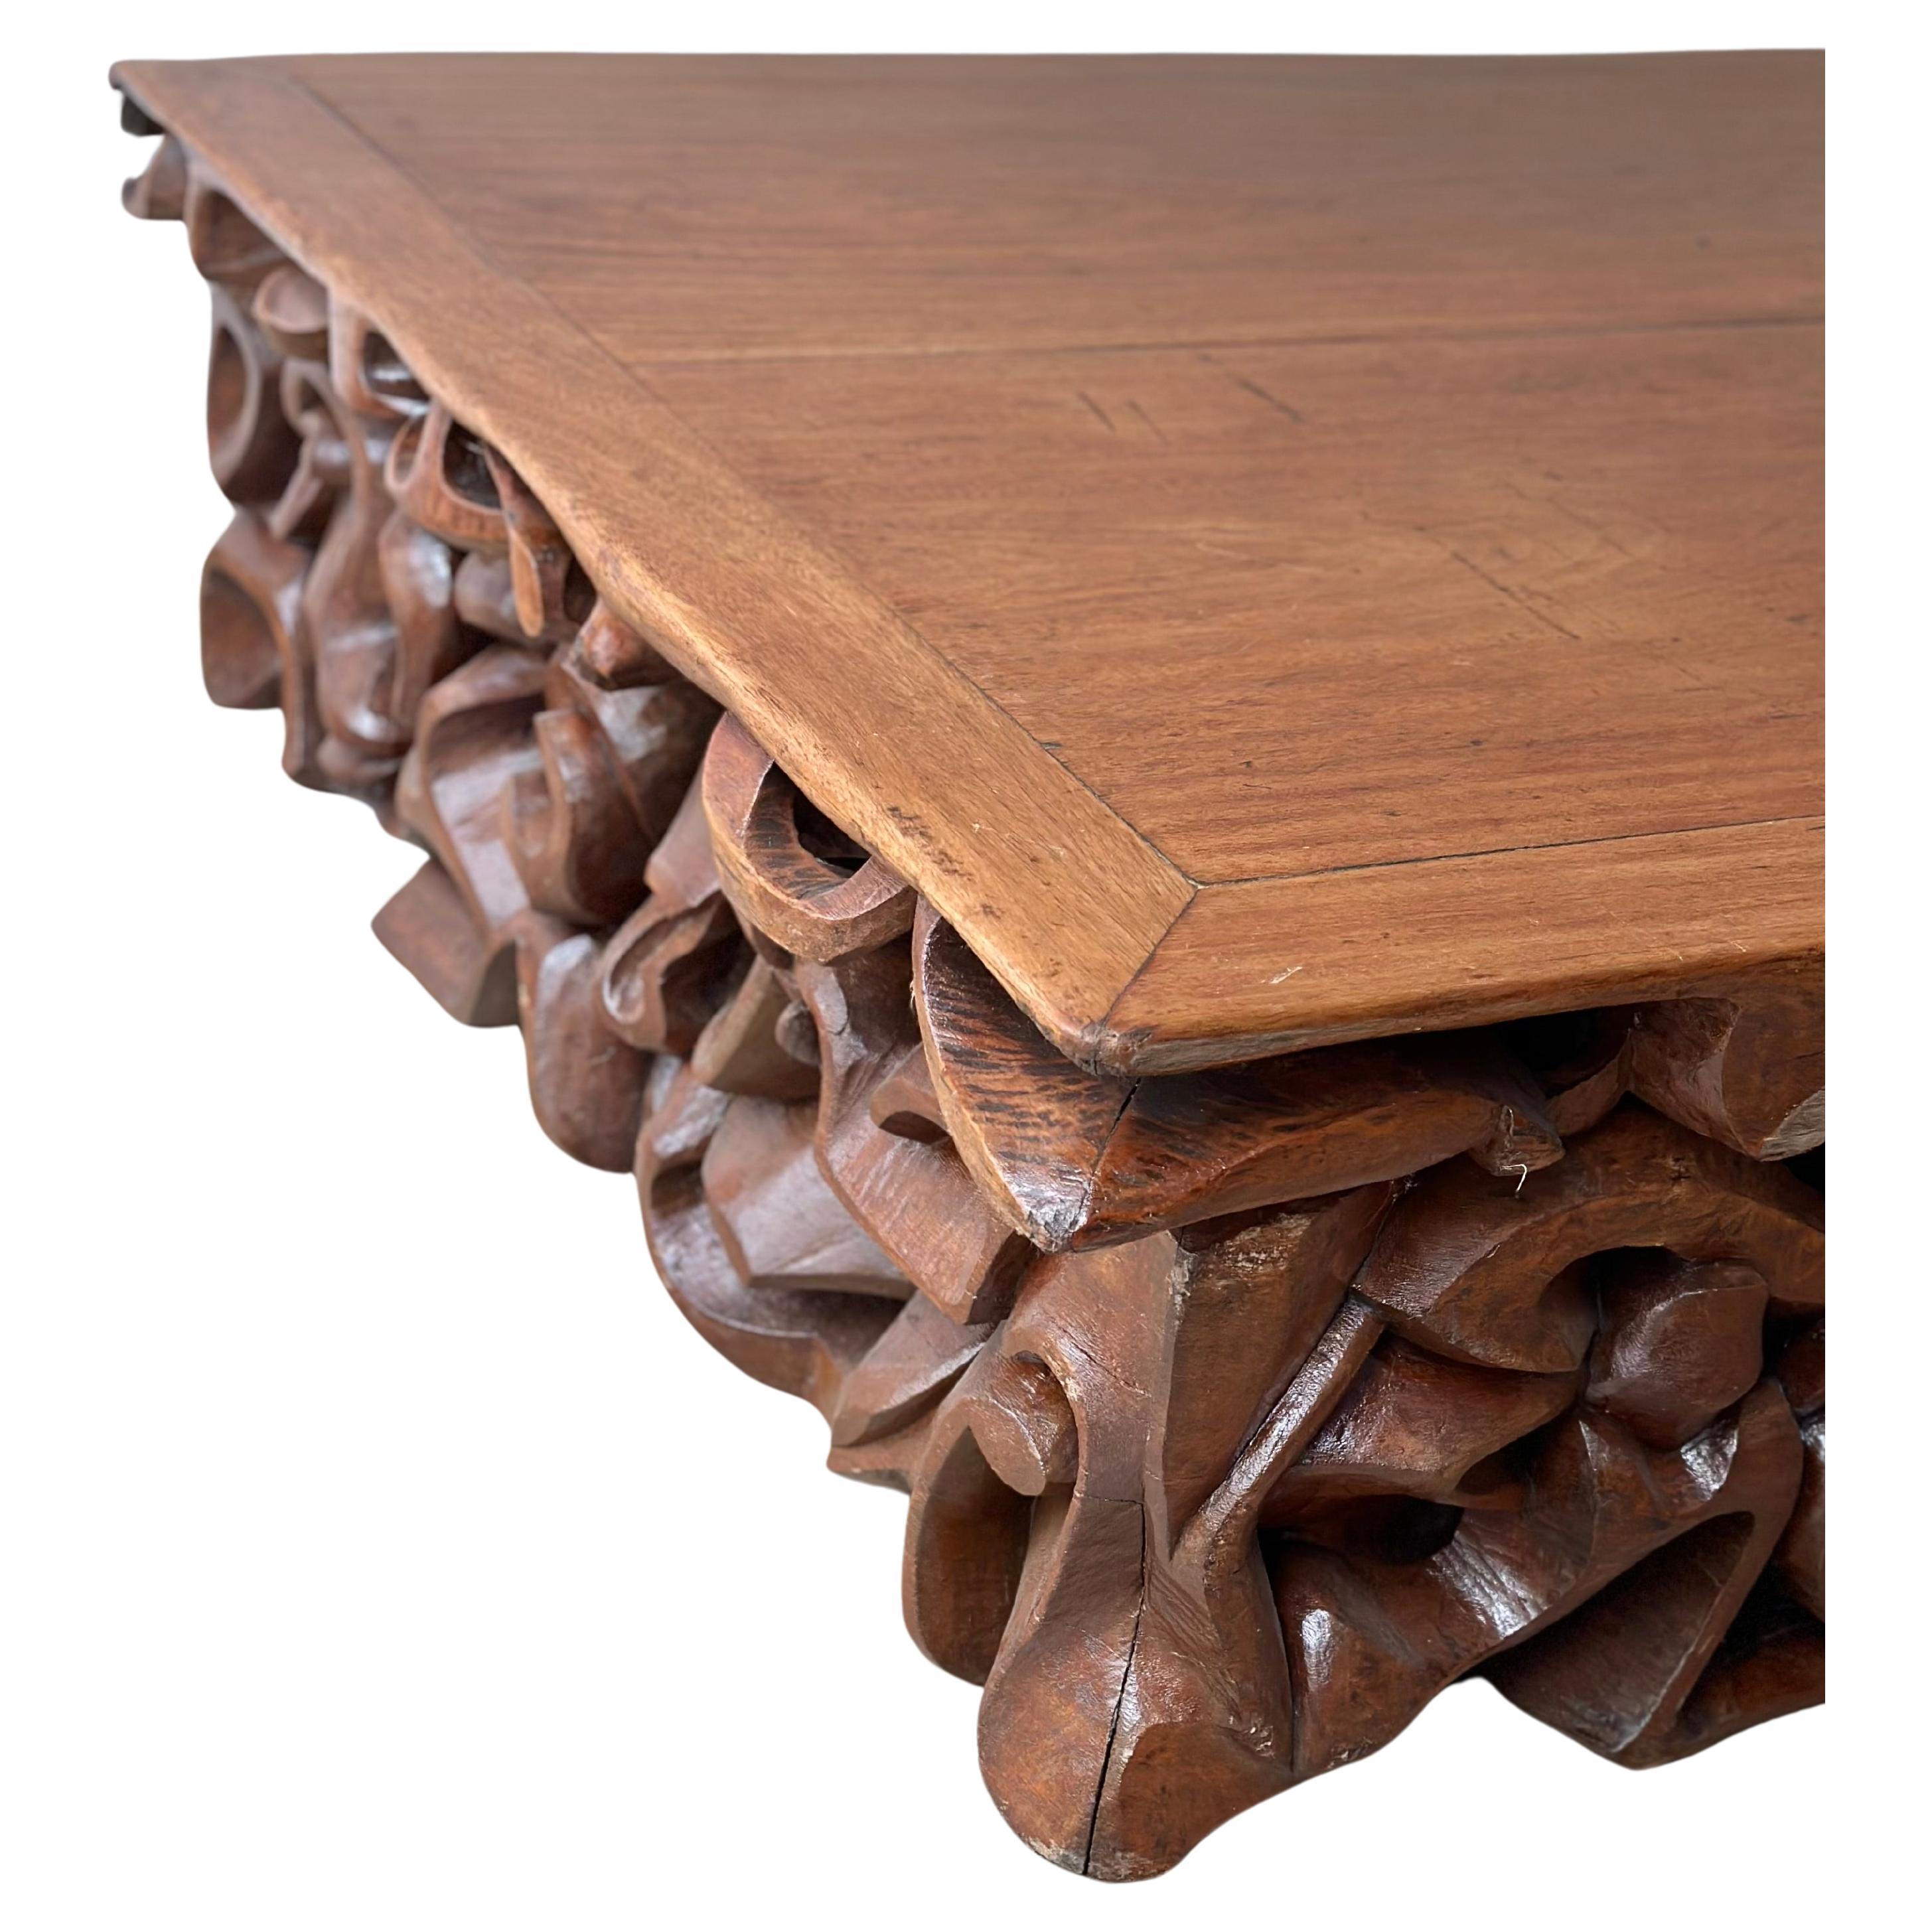 C.A Paudalho. Artisan Center Table in Wood